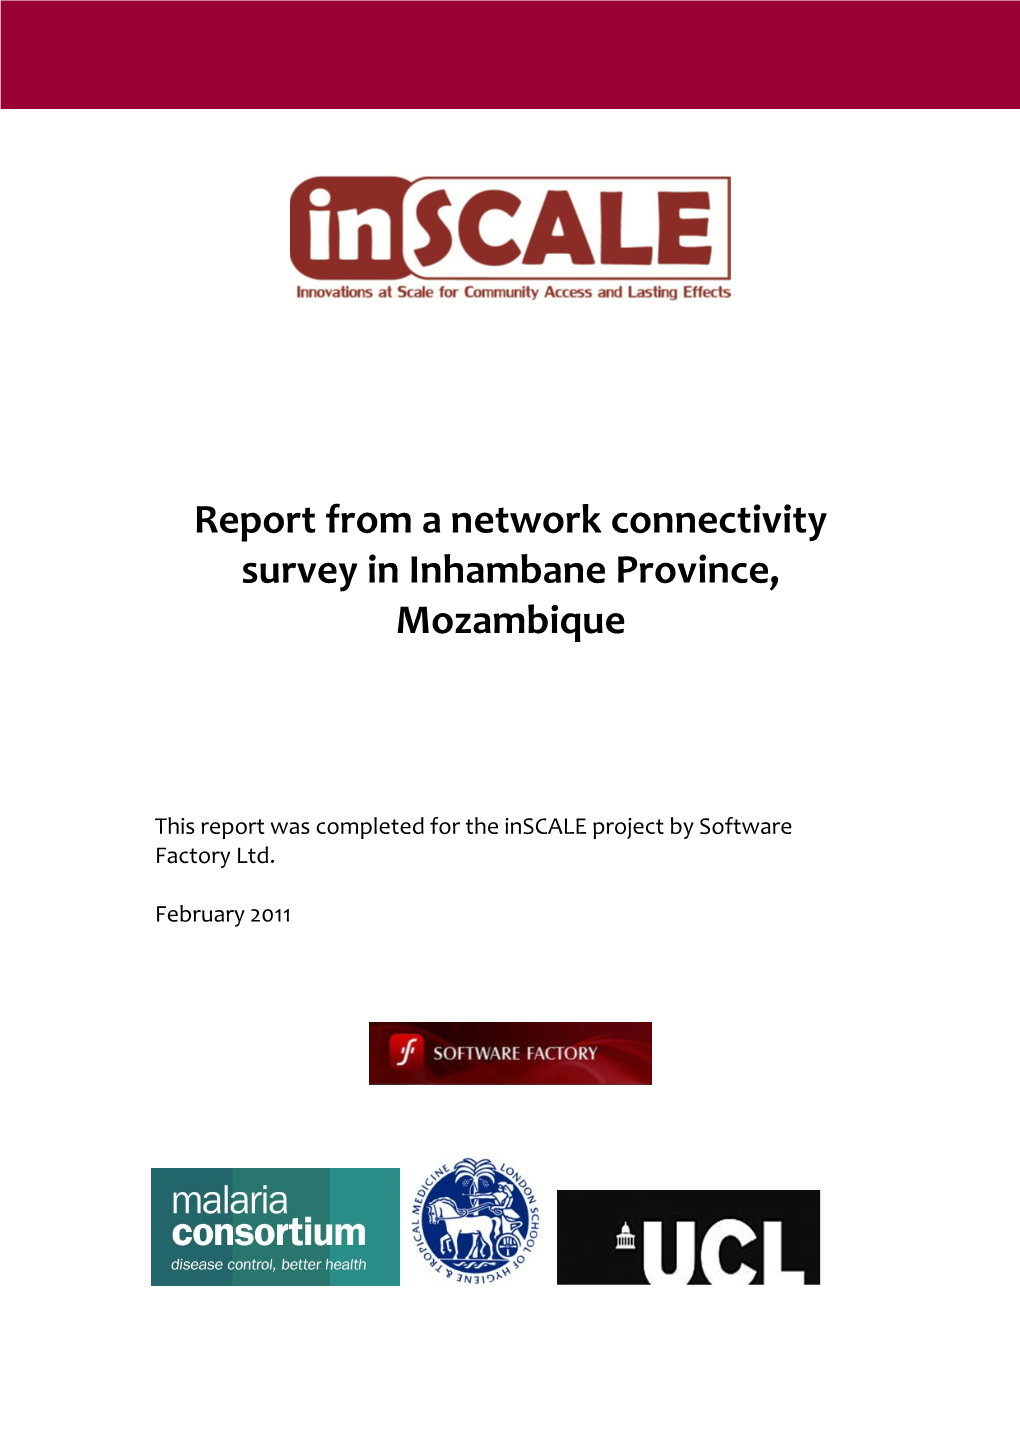 Report from a Network Connectivity Survey in Inhambane Province, Mozambique